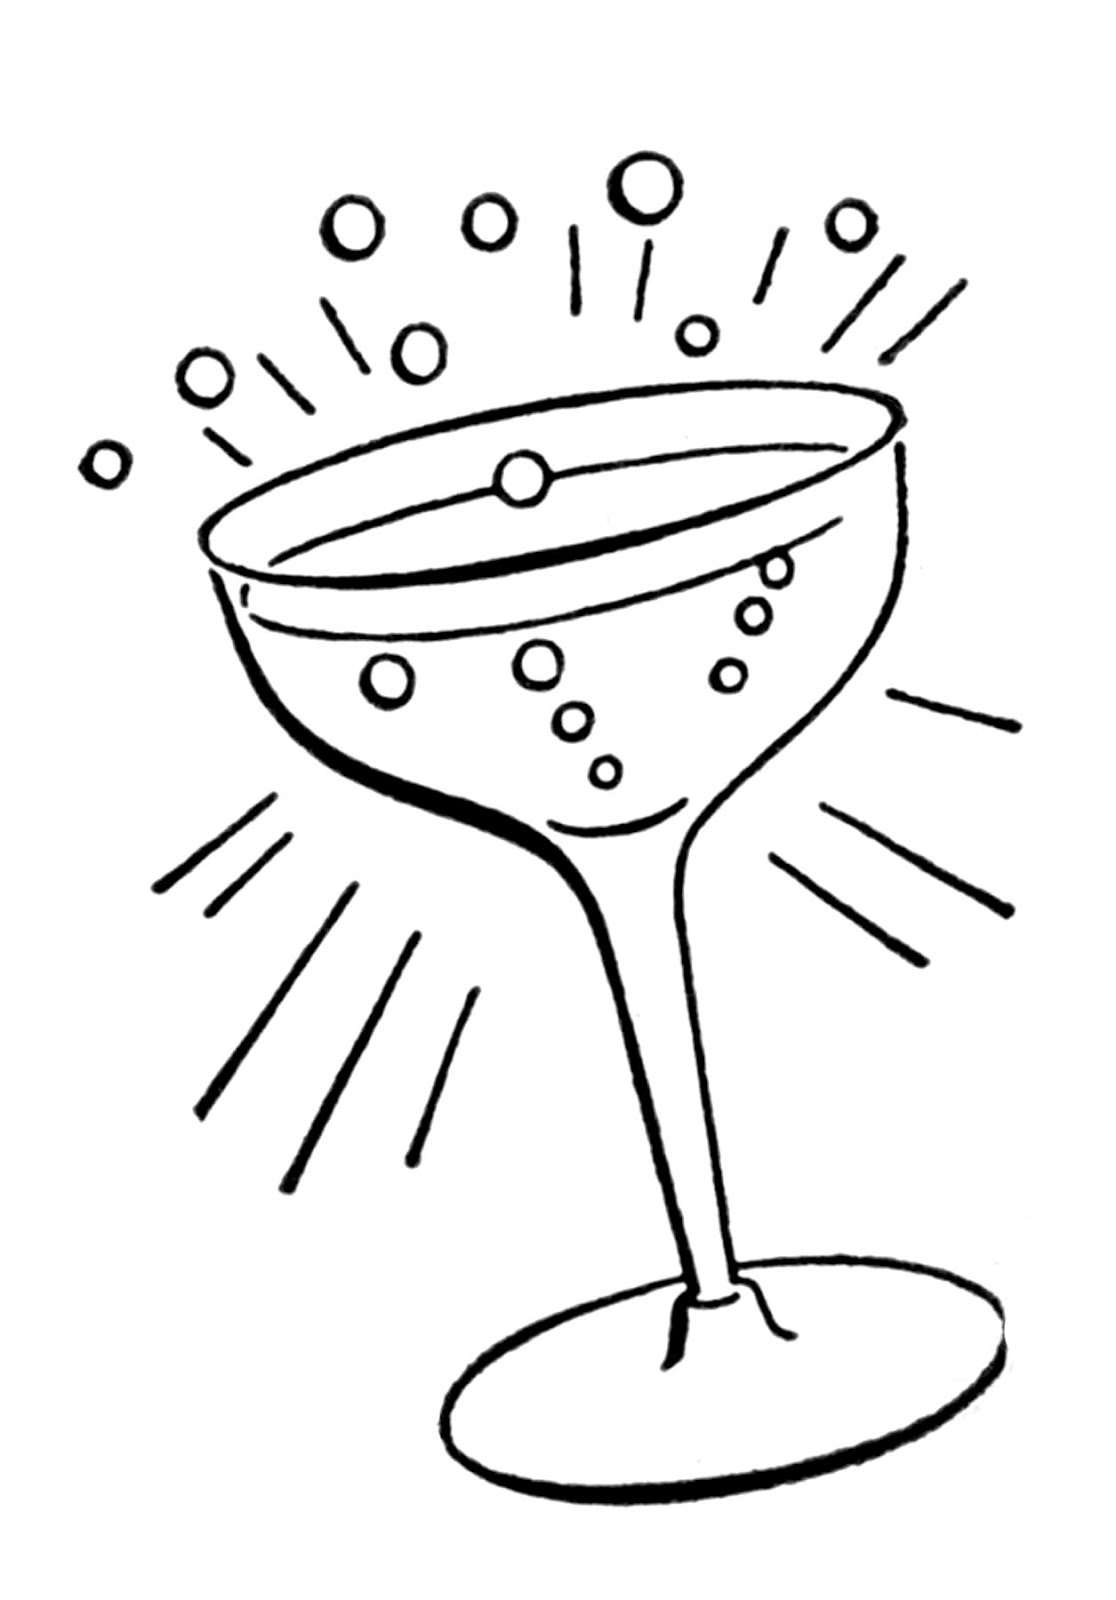 Martini glass cocktail glass clipart clipart image